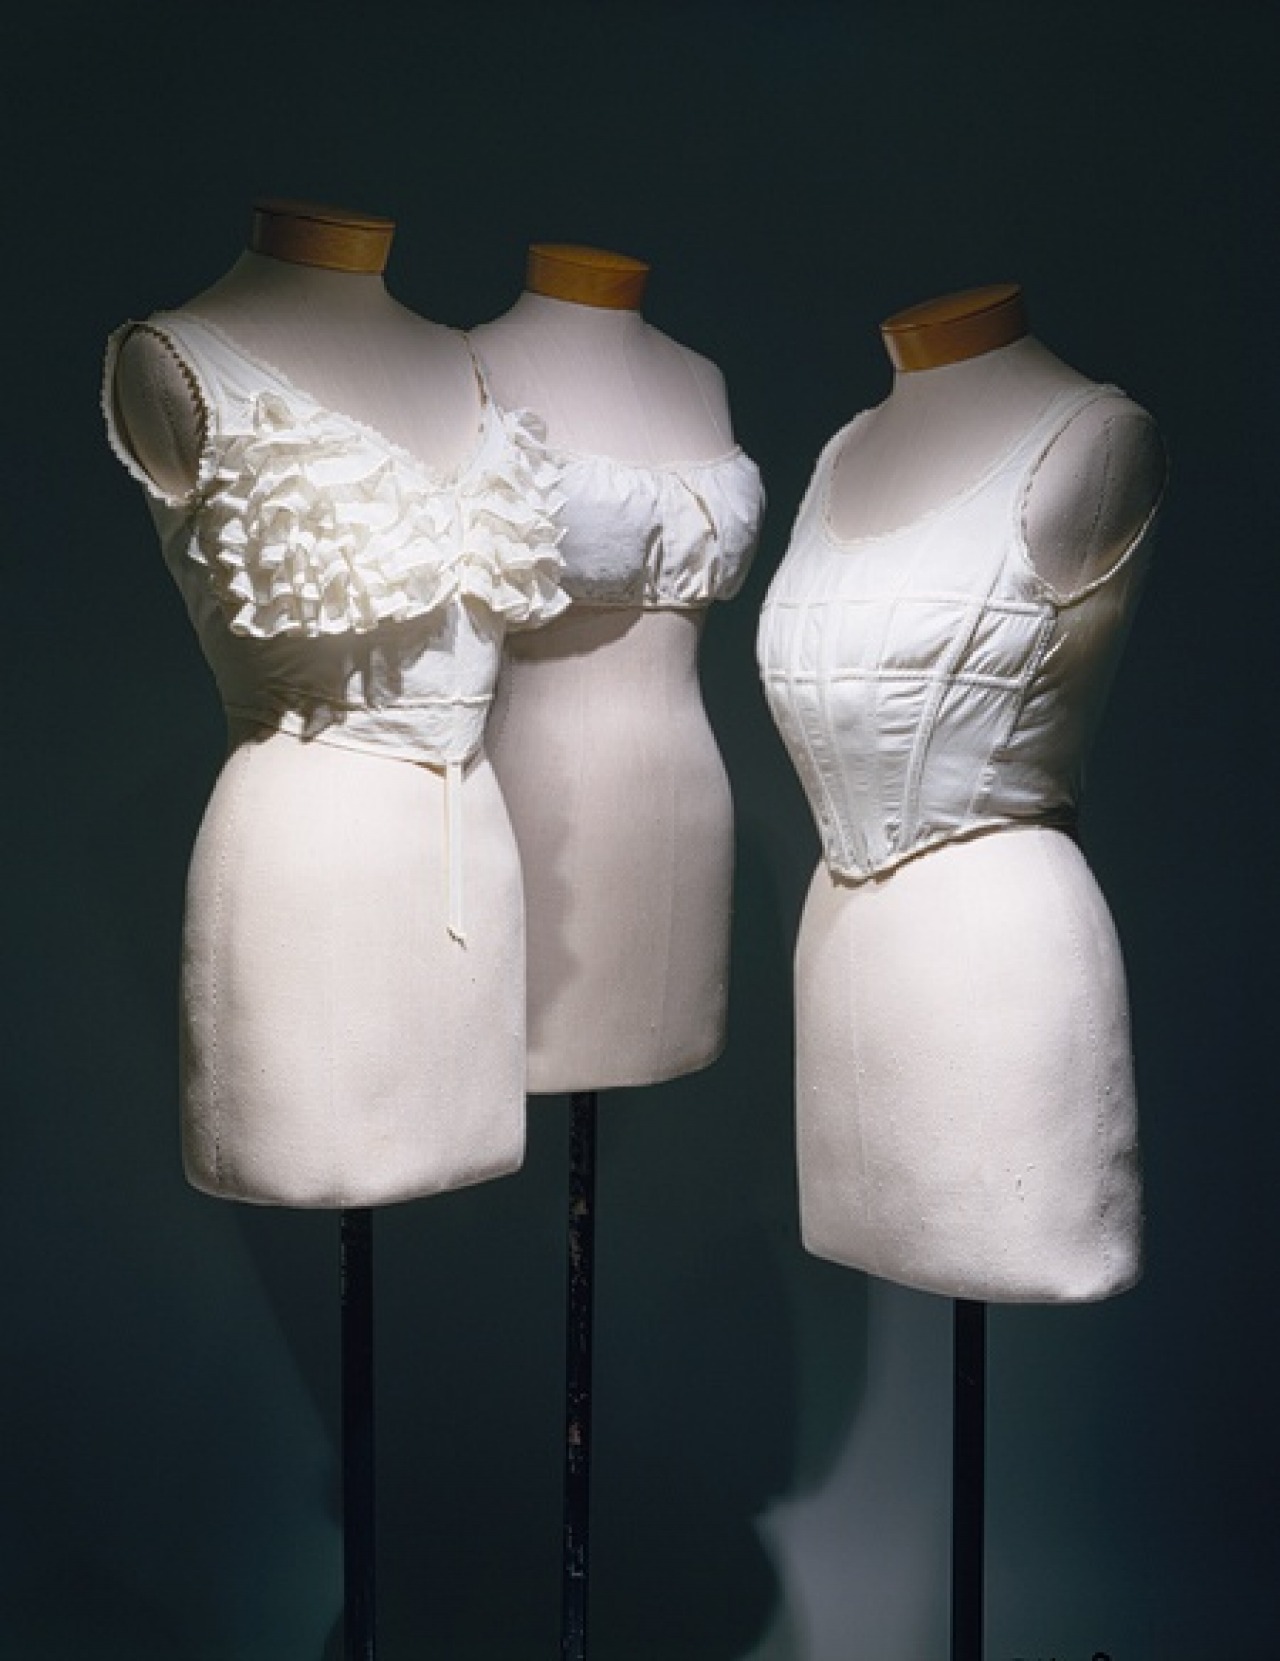 Getting dressed: What's underneath?  Fashion and Decor: A Cultural History